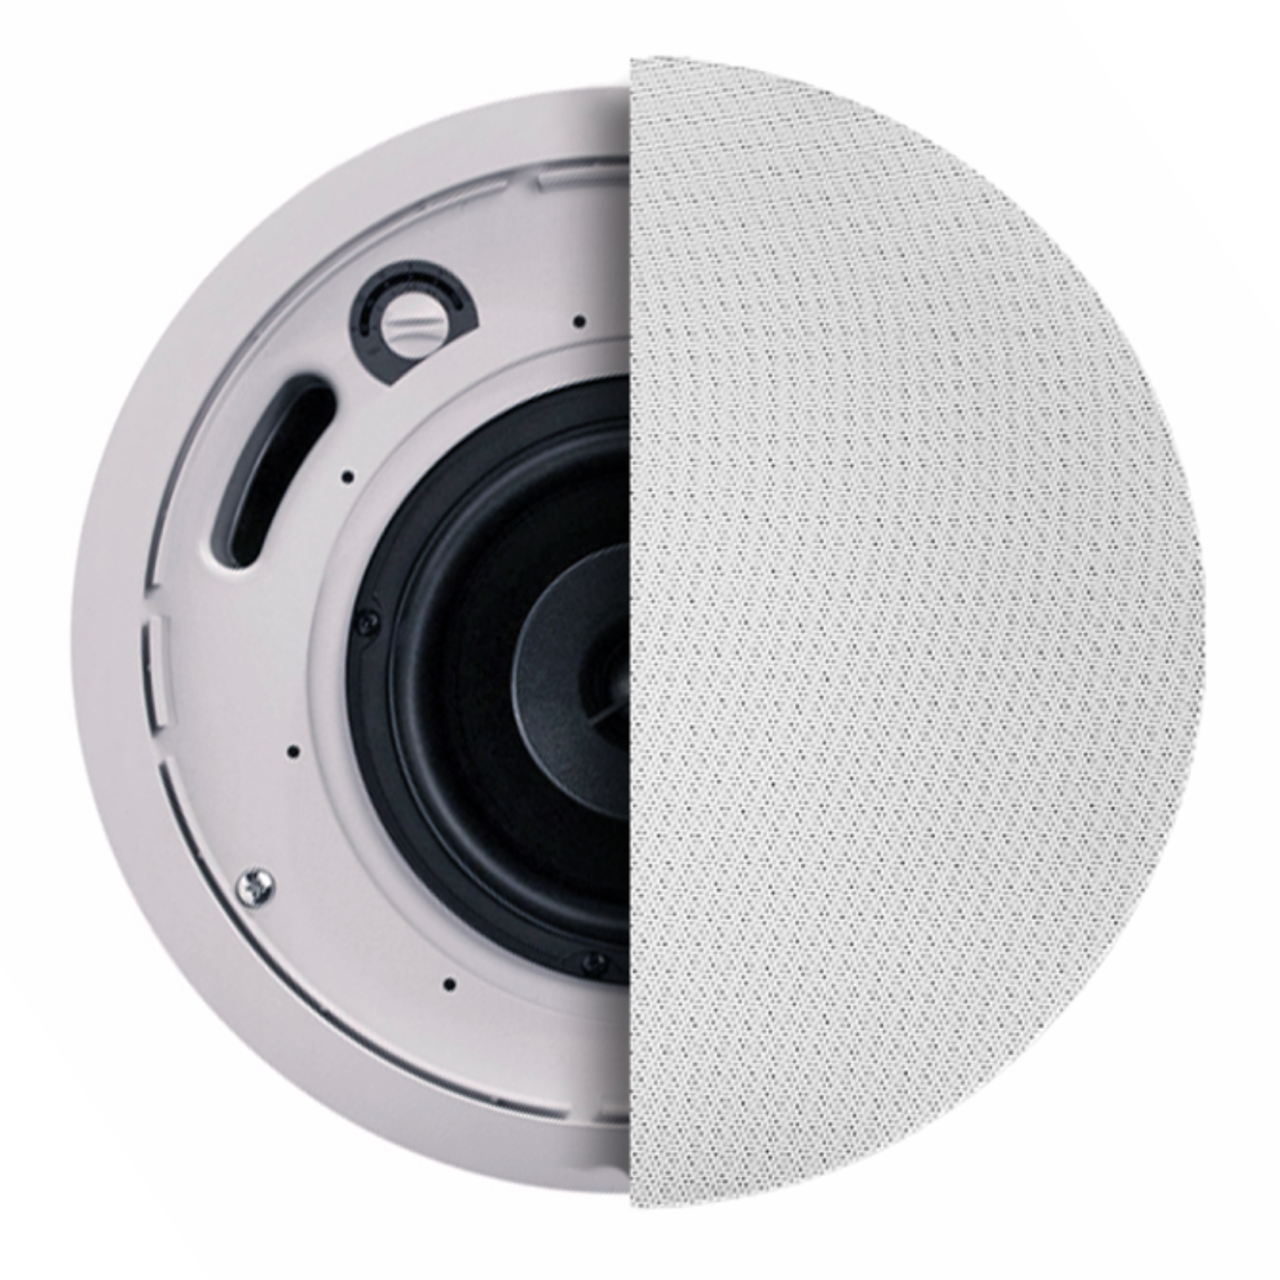 SoundTube IPD-CM82-BGM-II-WH 8" IP-Addressable, Dante-Enabled In-Ceiling Speaker with Seamless Magnetic White Grille (IPD-CM82-BGM-II-WH)